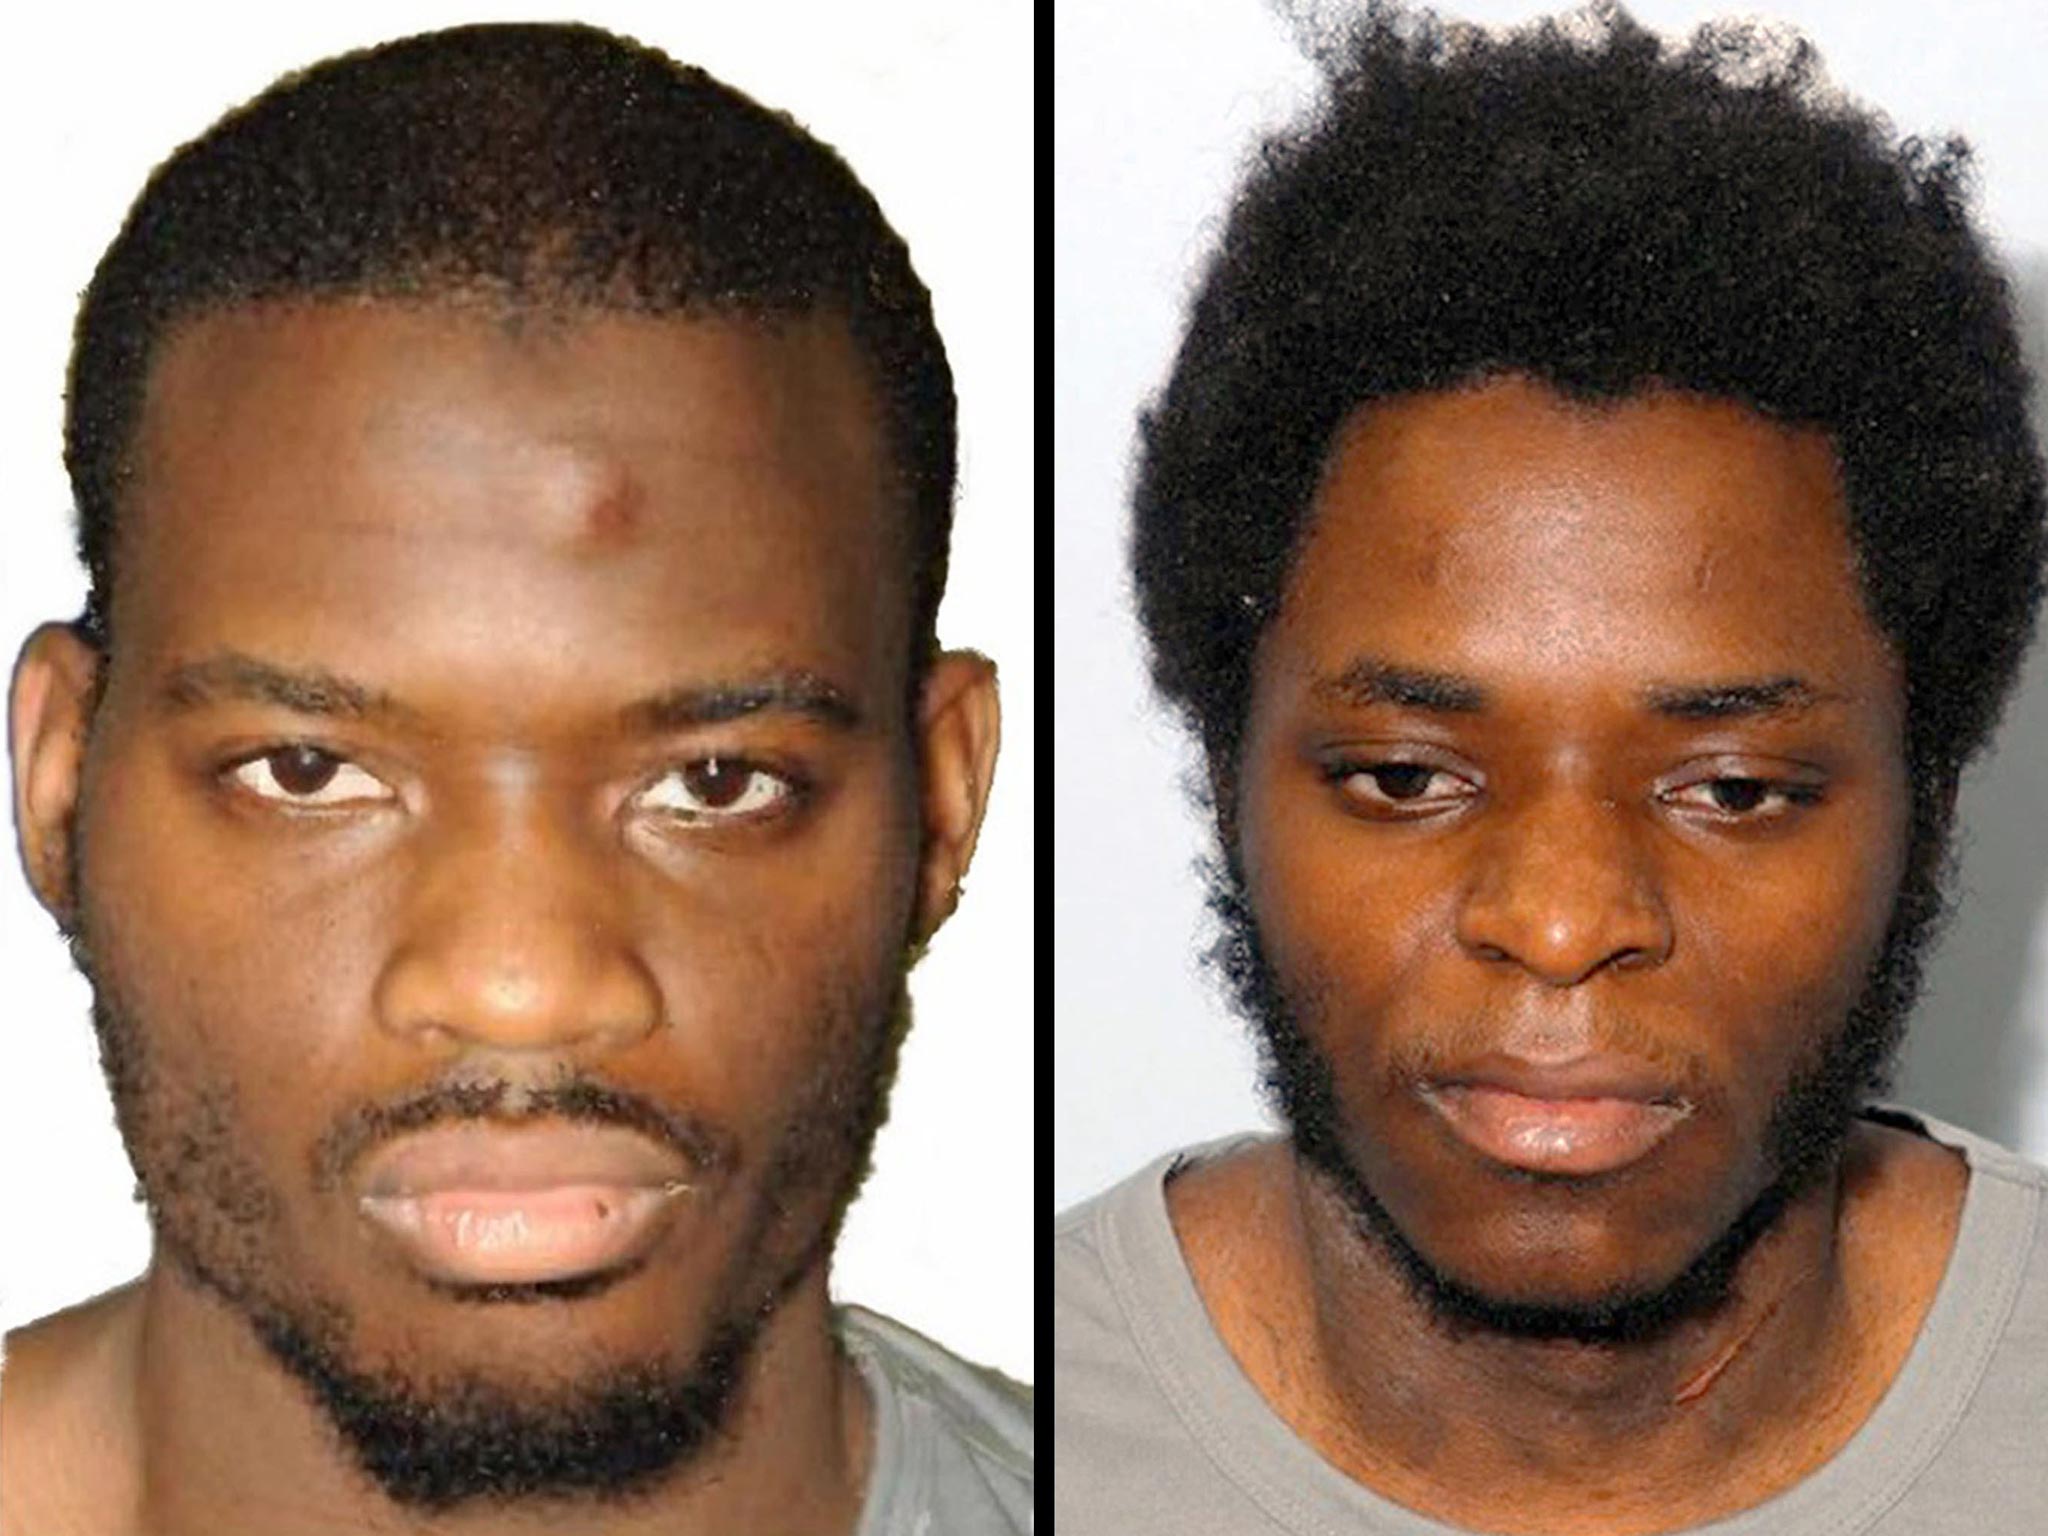 Michael Adebolajo (left) and Michael Adebowale were found guilty of the murder of soldier Lee Rigby